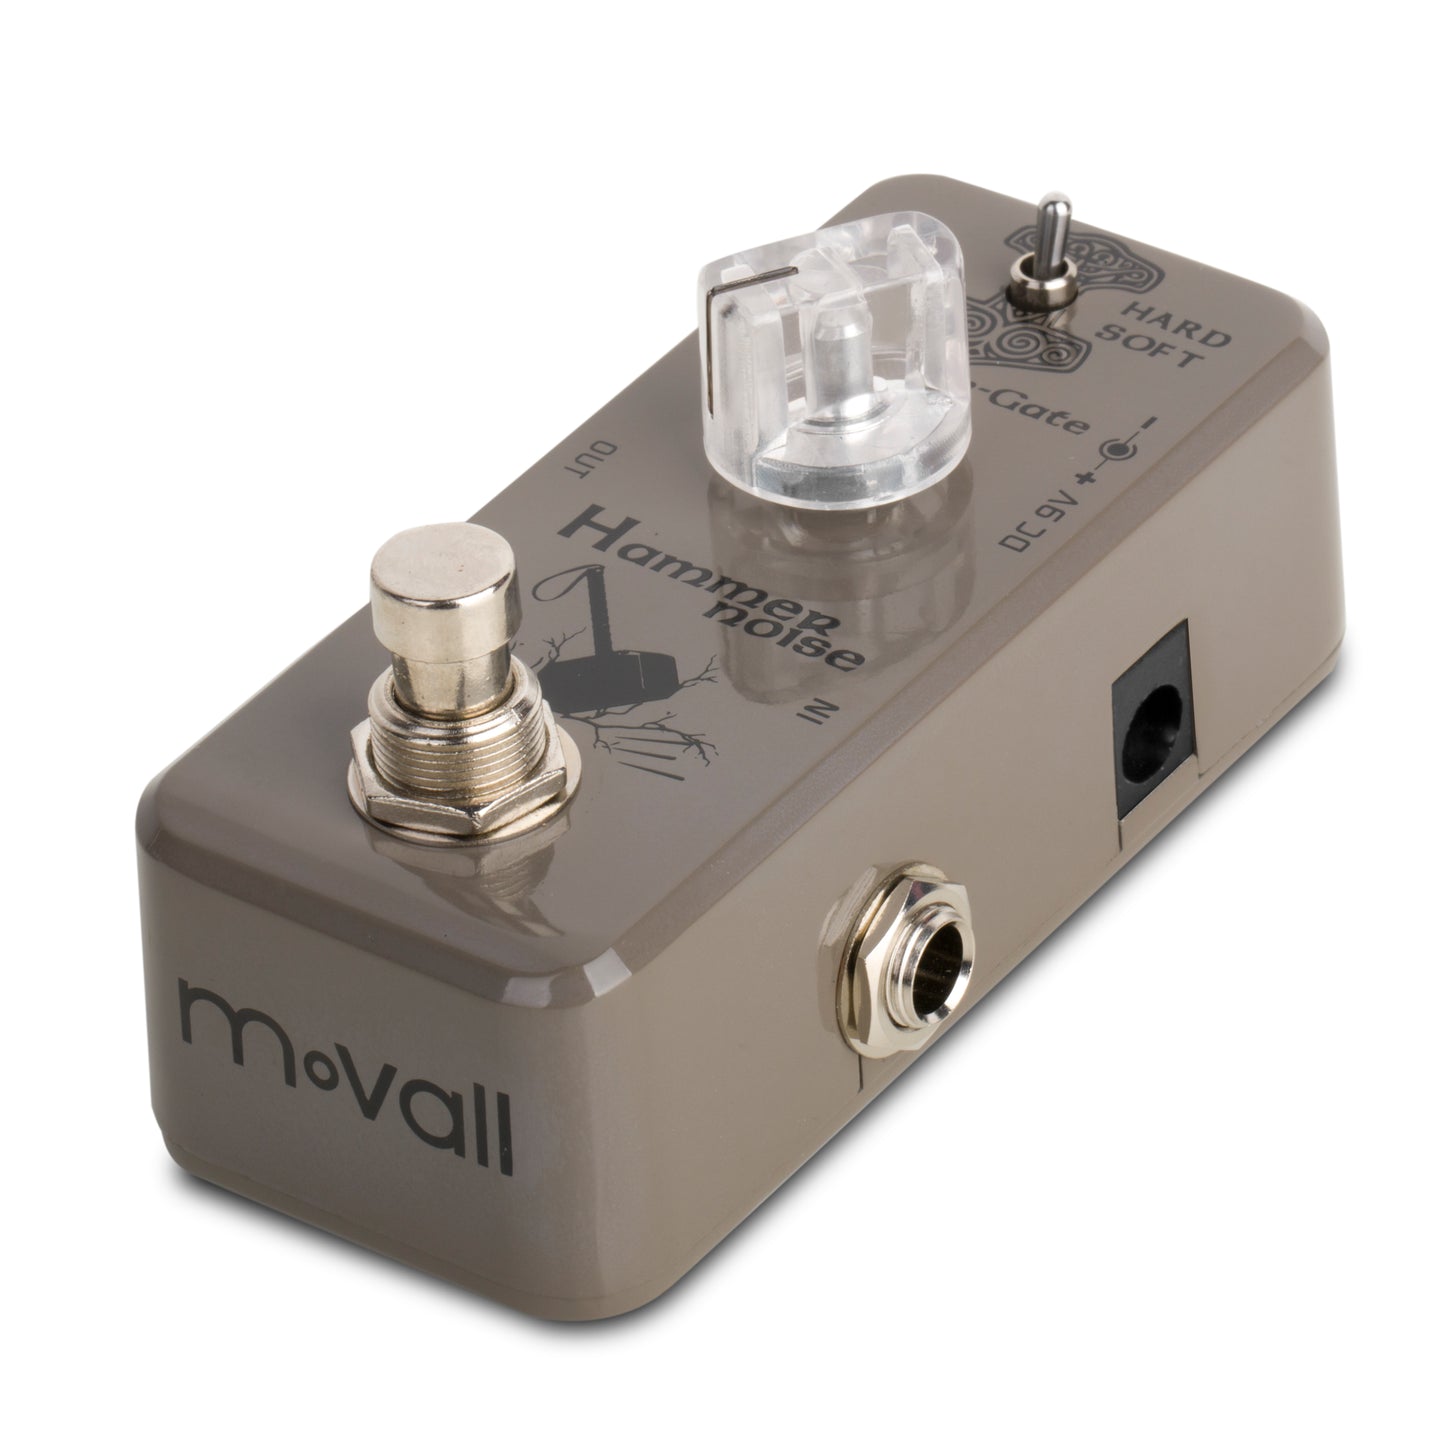 Movall MP-307 Hammer Noise Mini Noise Gate Pedal